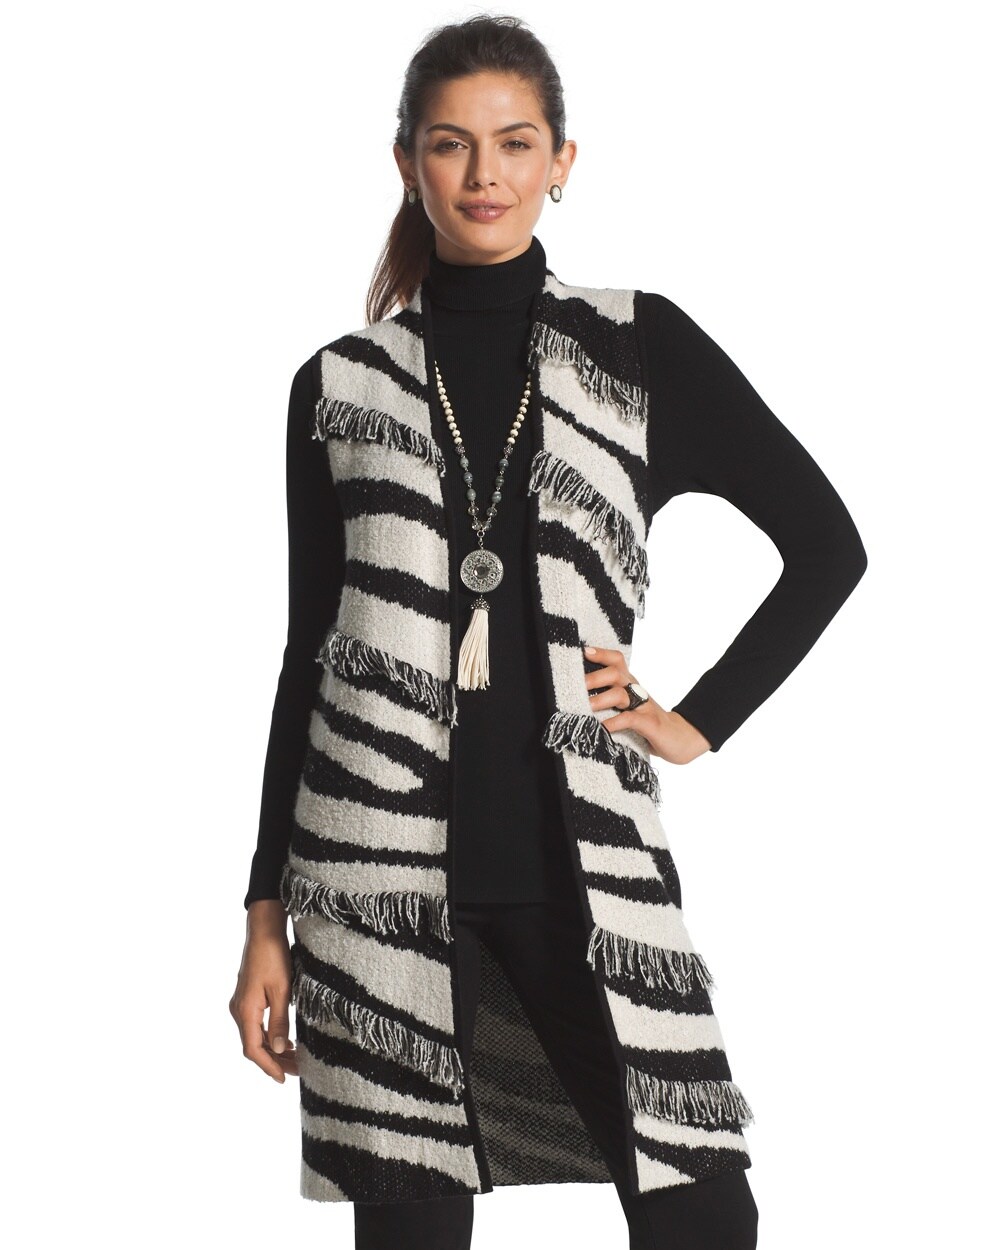 Zebra Fringed Anne Vest video preview image, click to start video